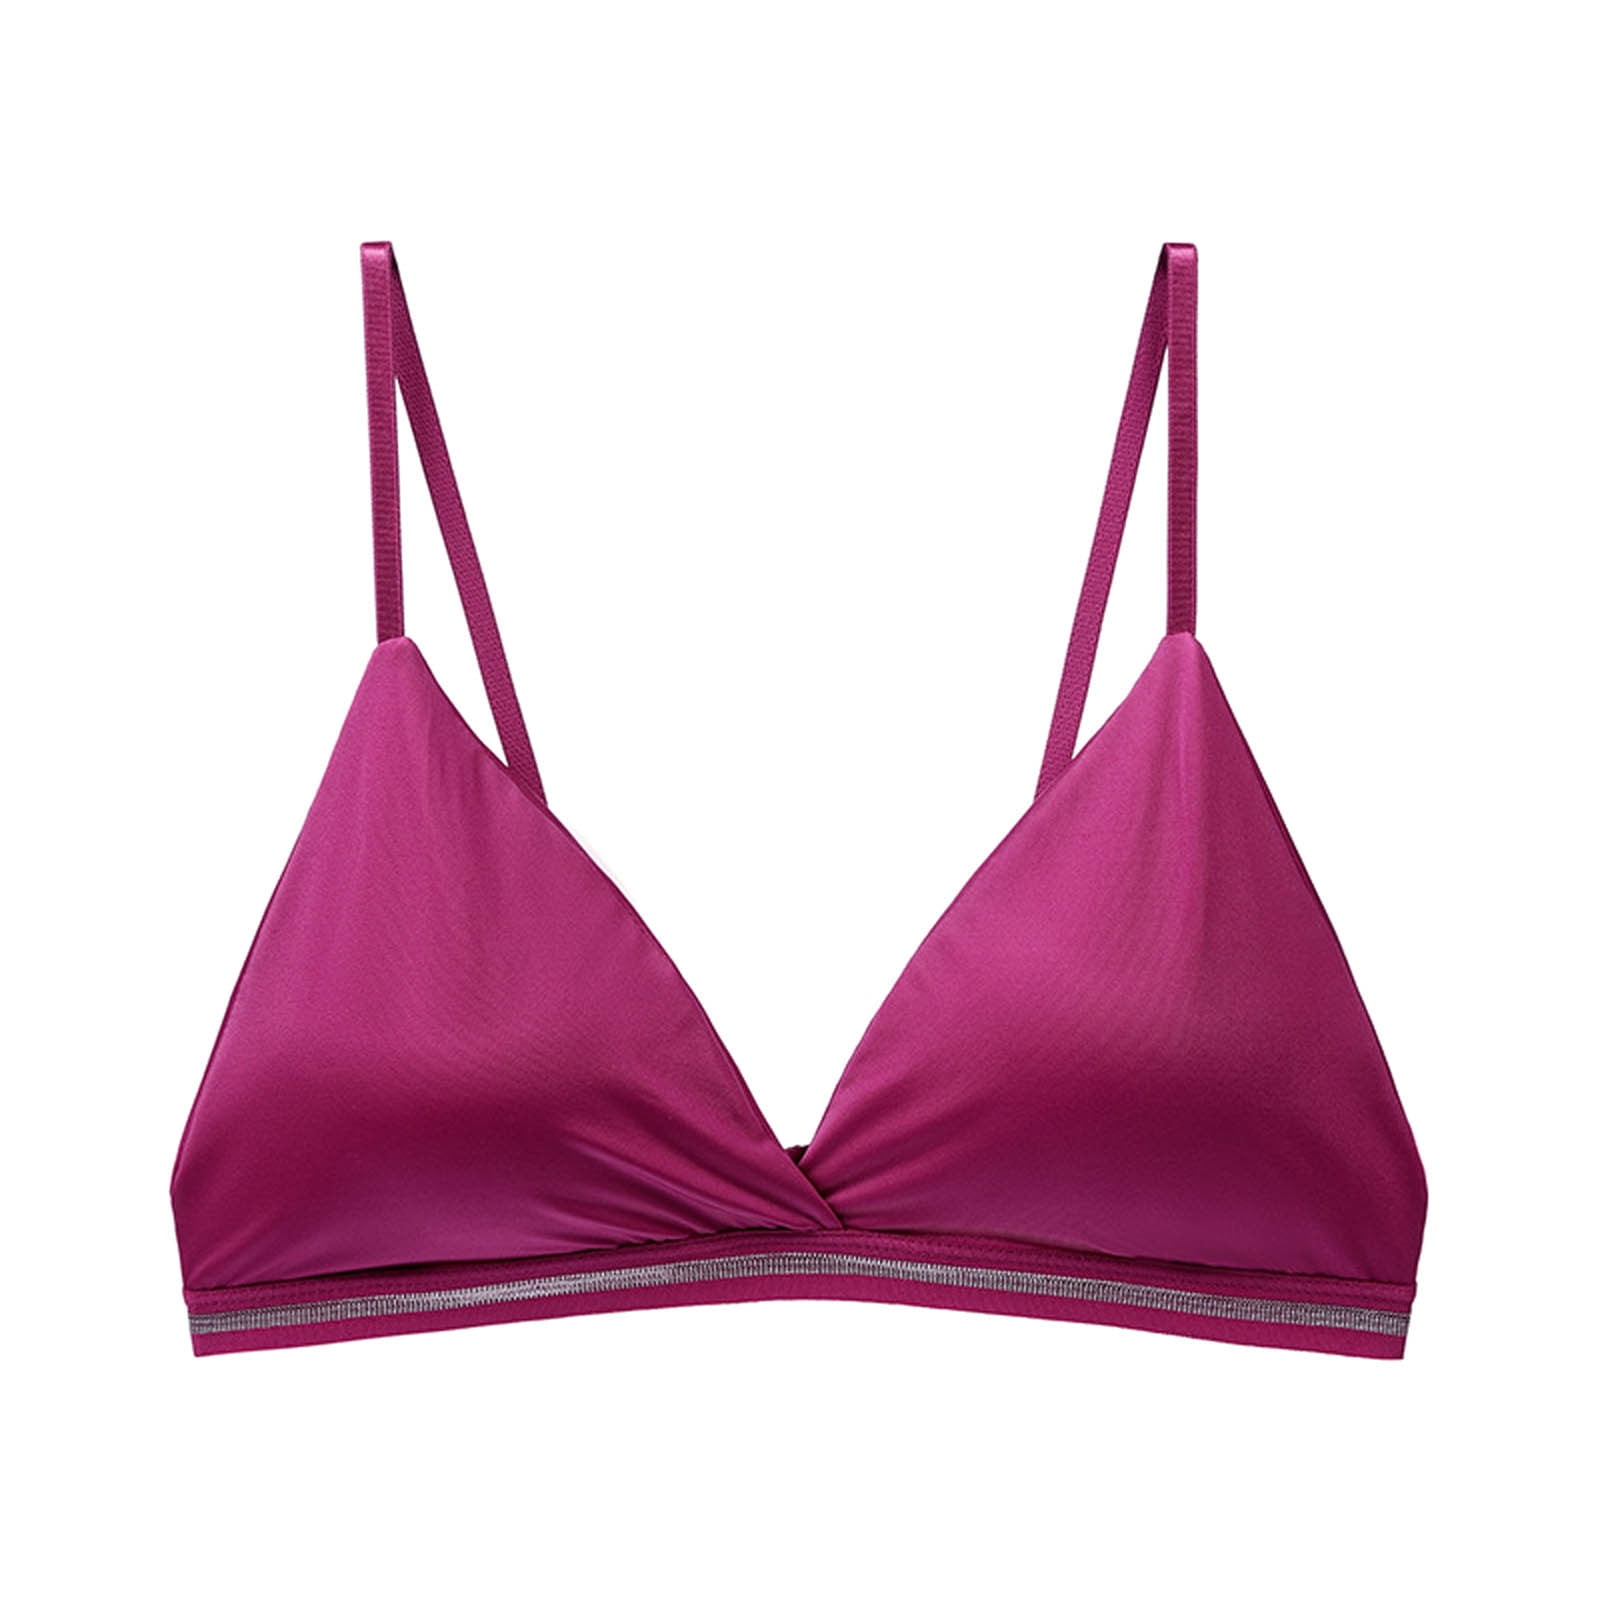 RYRJJ Women's Silk Satin Triangle Bralette Soft Cup Wireless Bra Smooth and  Comfortable Wire Free Bra Top(Hot Pink,S) 